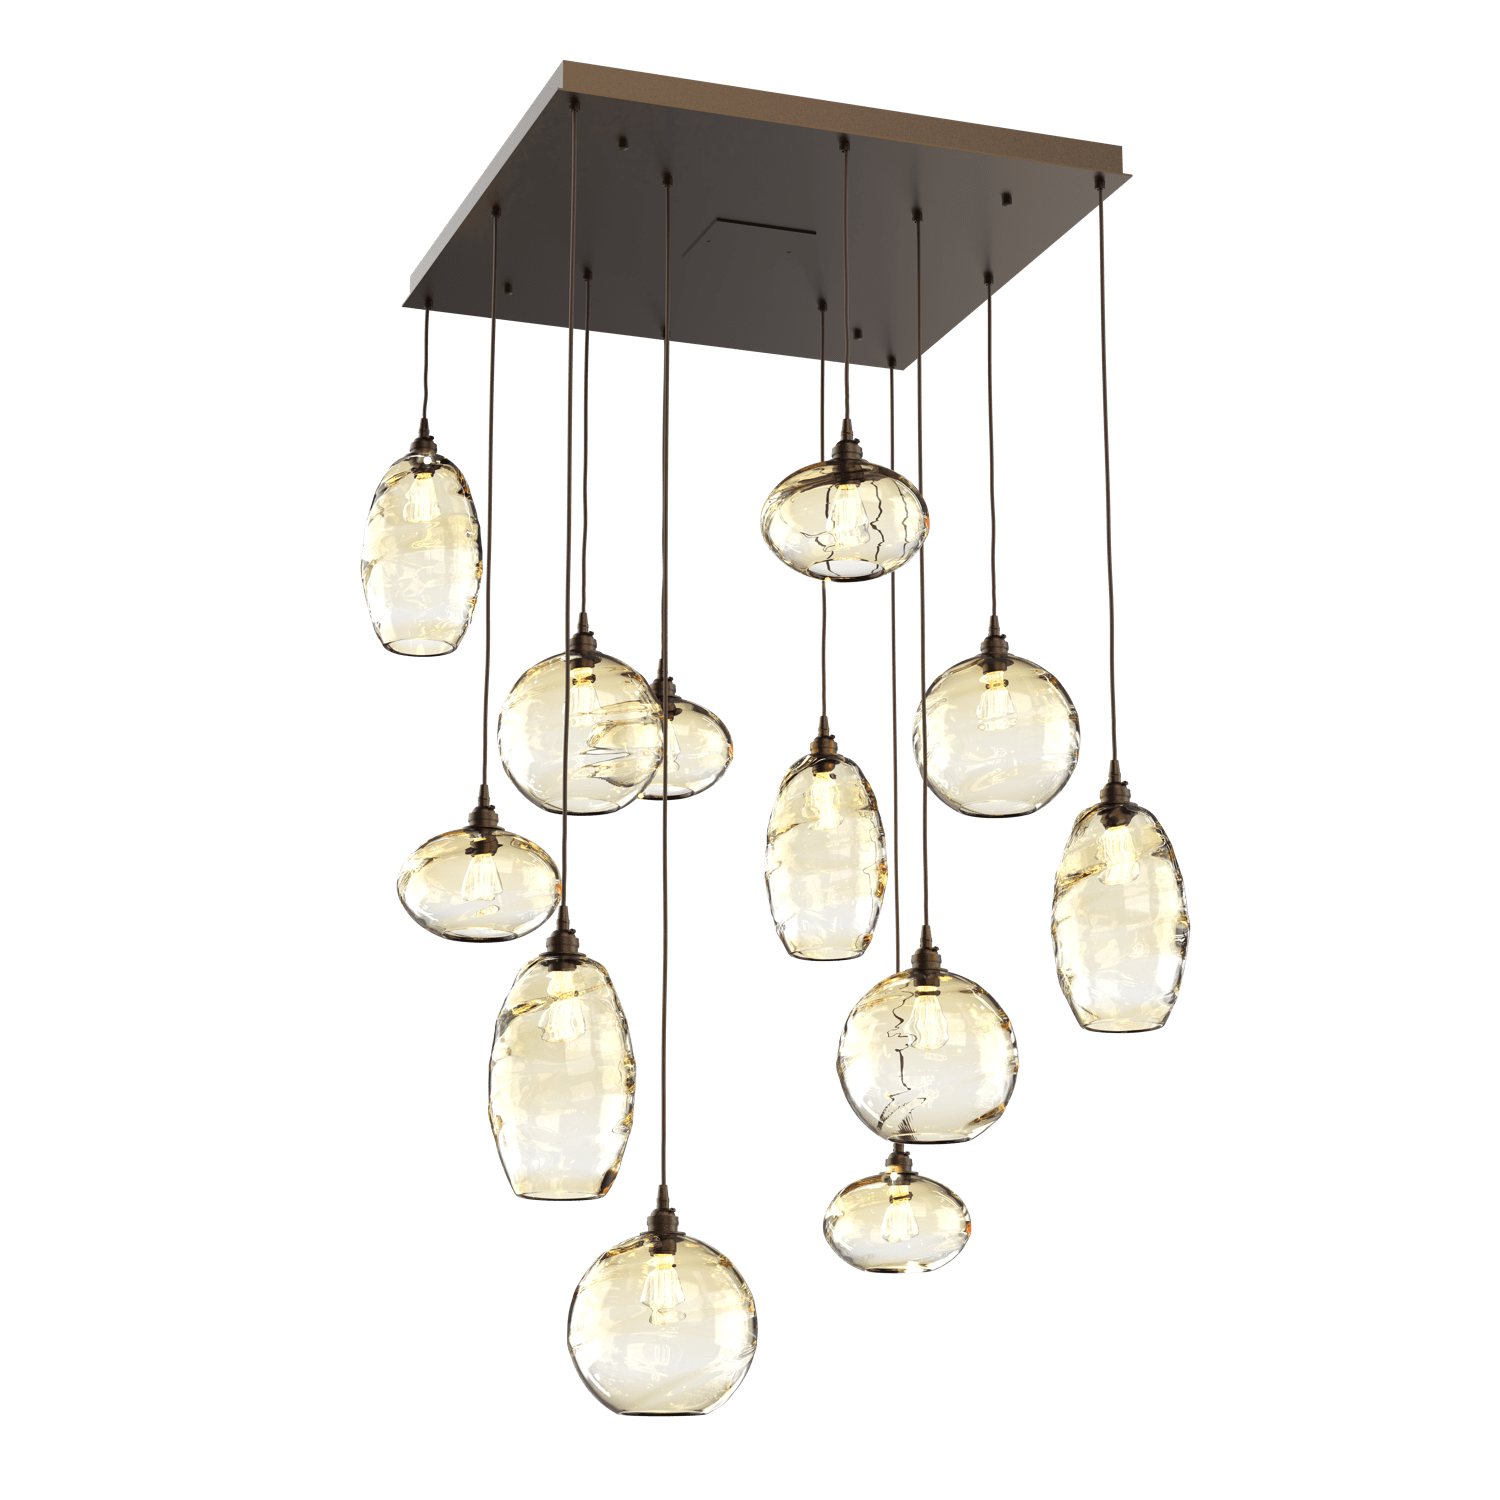 CHB0048-12-FB-OA-Hammerton-Studio-Optic-Blown-Glass-Misto-12-light-square-pendant-chandelier-with-flat-bronze-finish-and-optic-amber-blown-glass-shades-and-incandescent-lamping